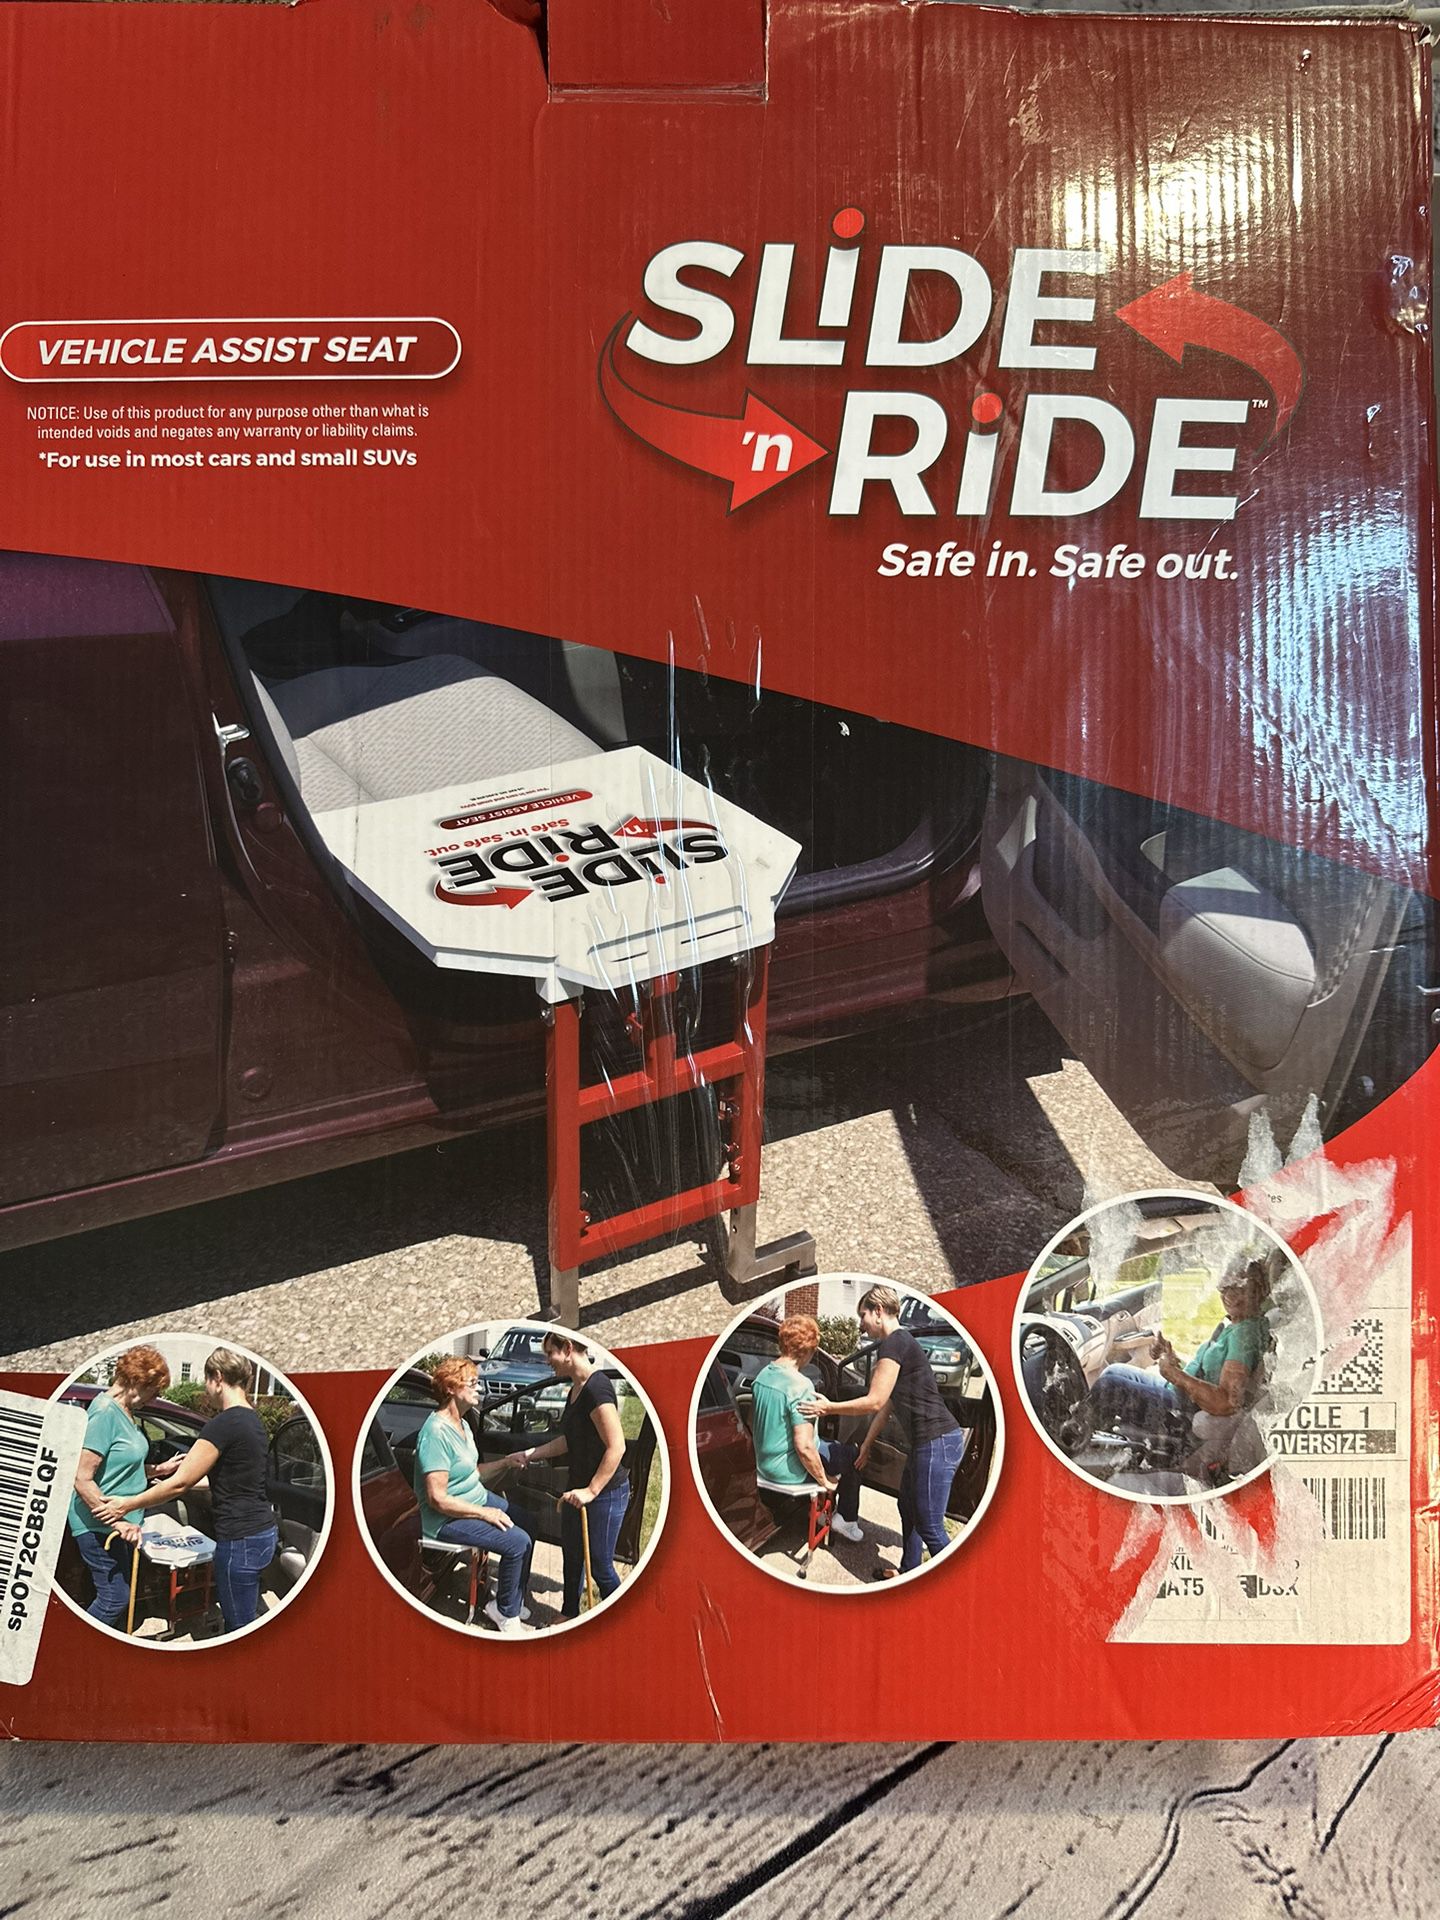 SLIDE 'n RIDE Vehicle Assist Transfer Seat/Board/Device 500lb. Rated-Adjustable, Safe, Compact - Important: Measure Your Vehicle Before Purchase